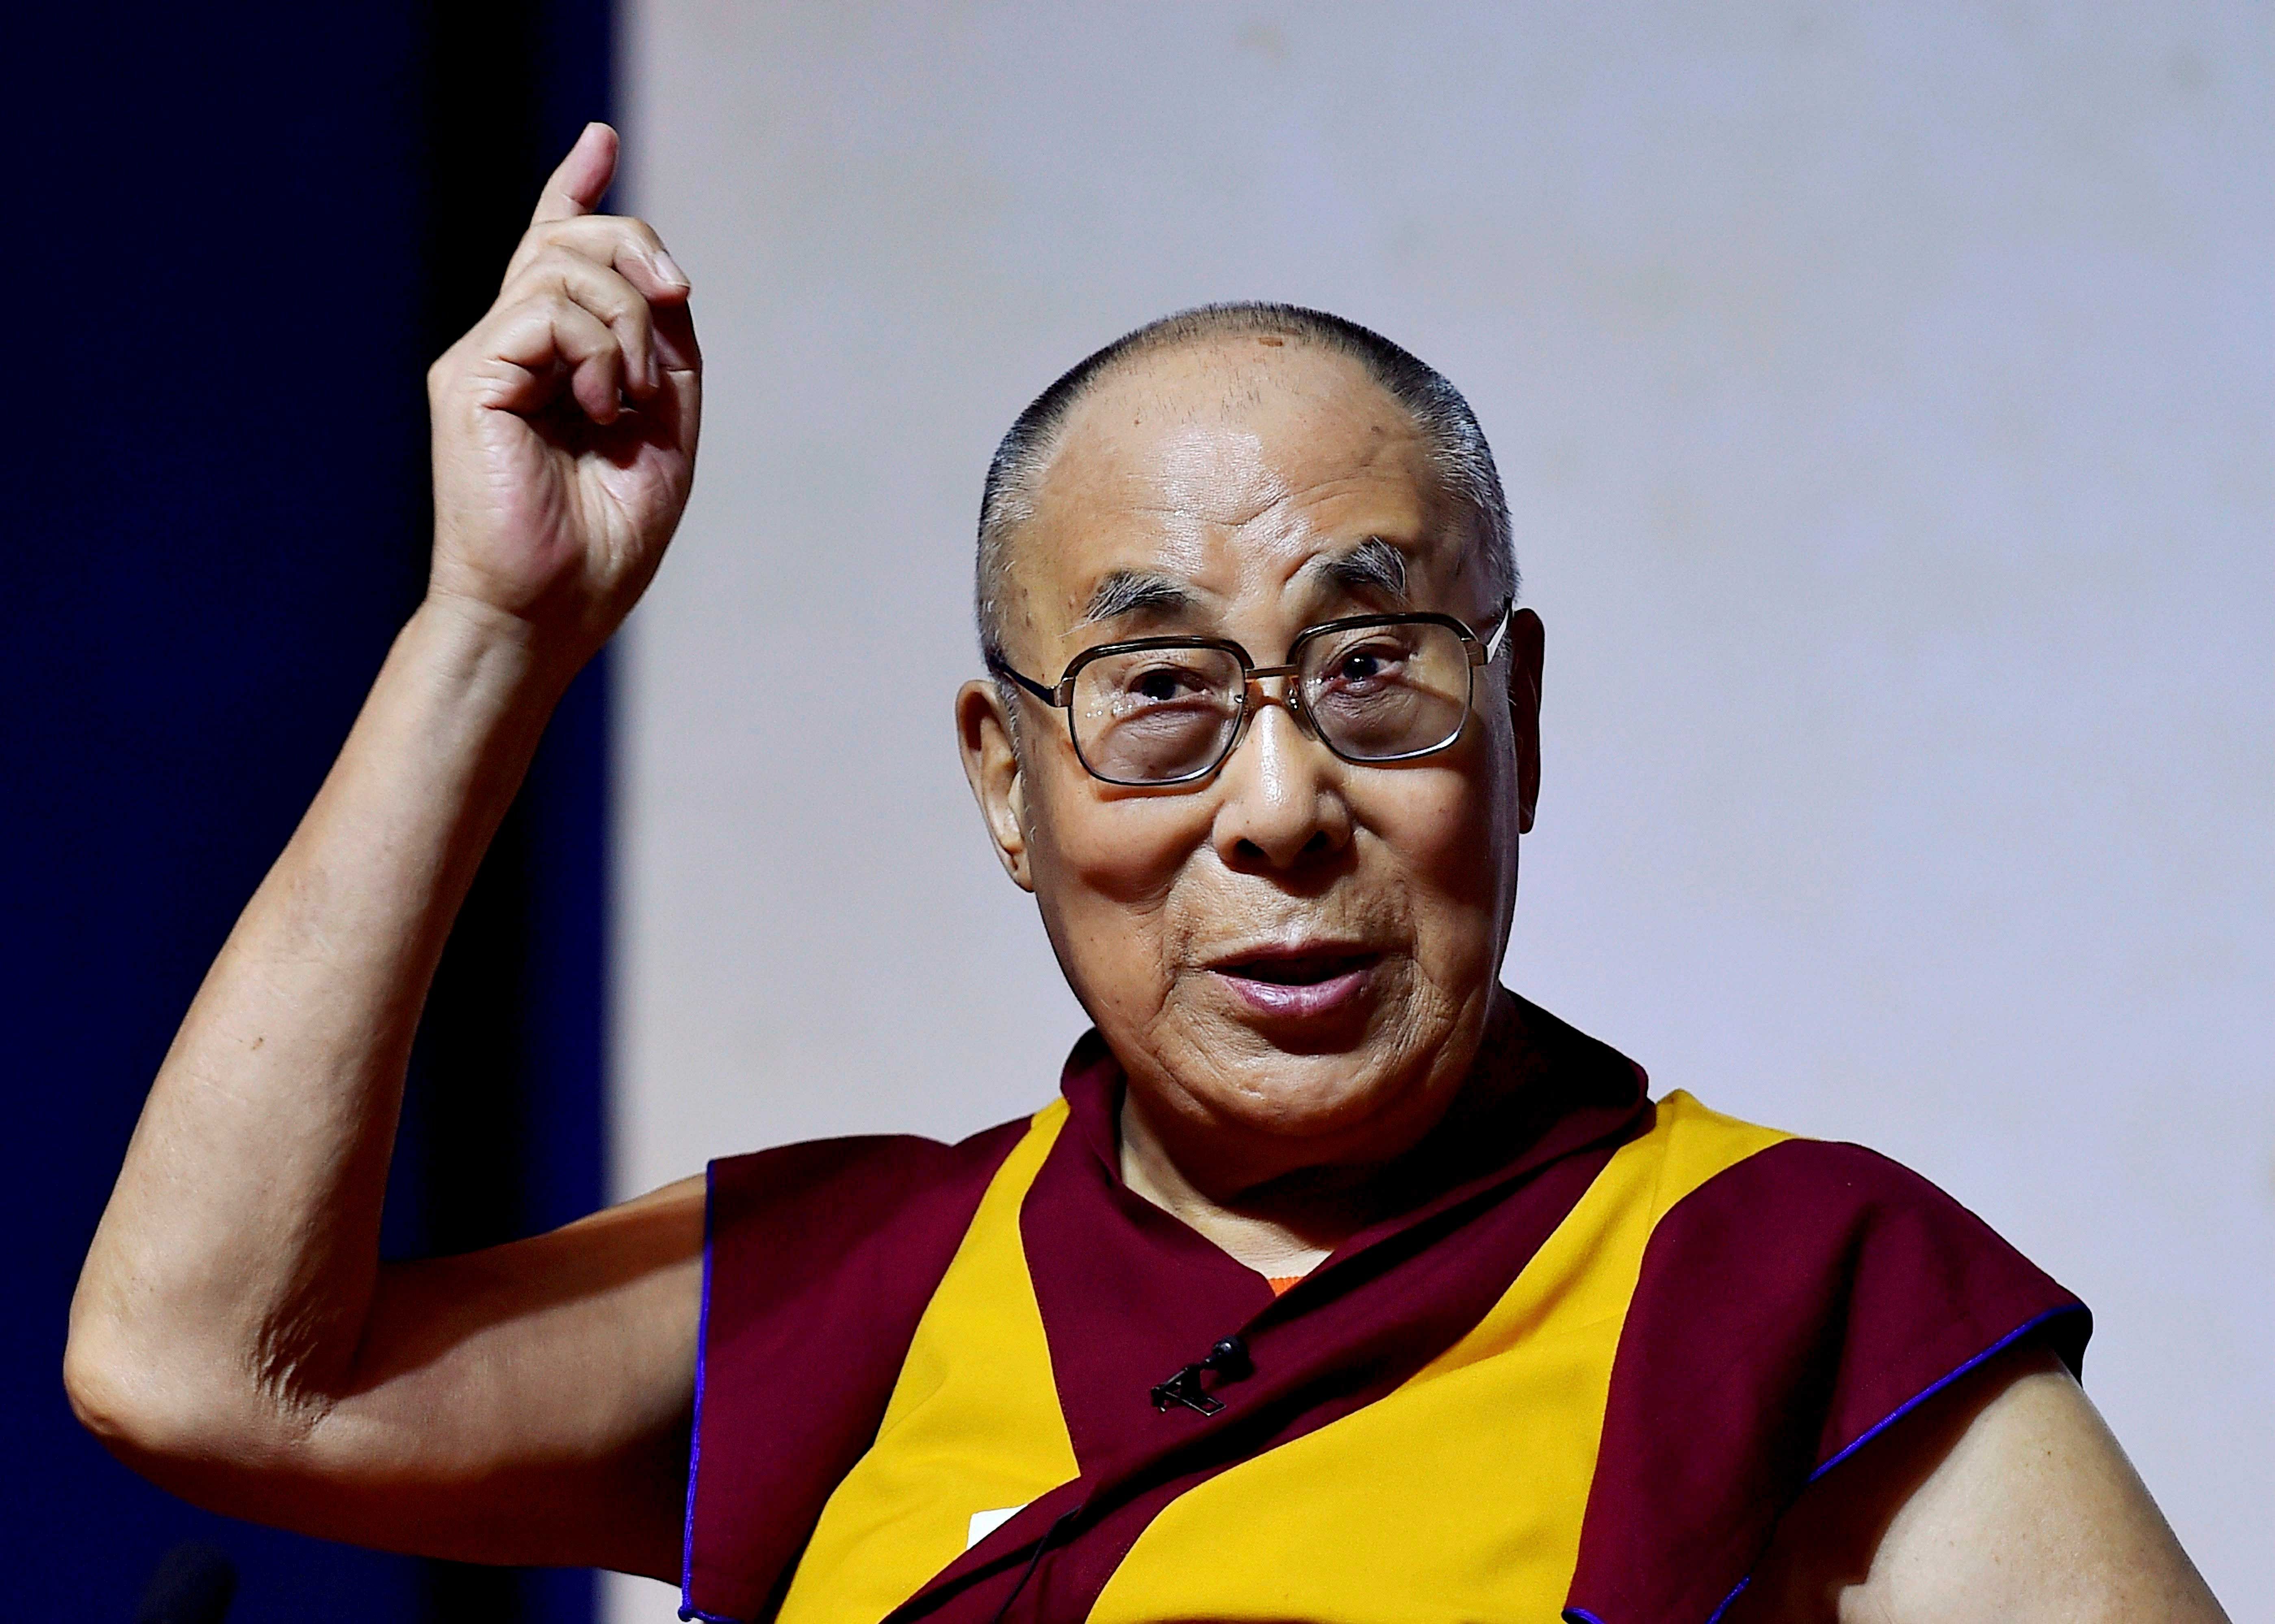 The controversy kicked up by Dalai Lama's statements raises the question whether we are now prone to take offence too easily. (PTI File Photo)